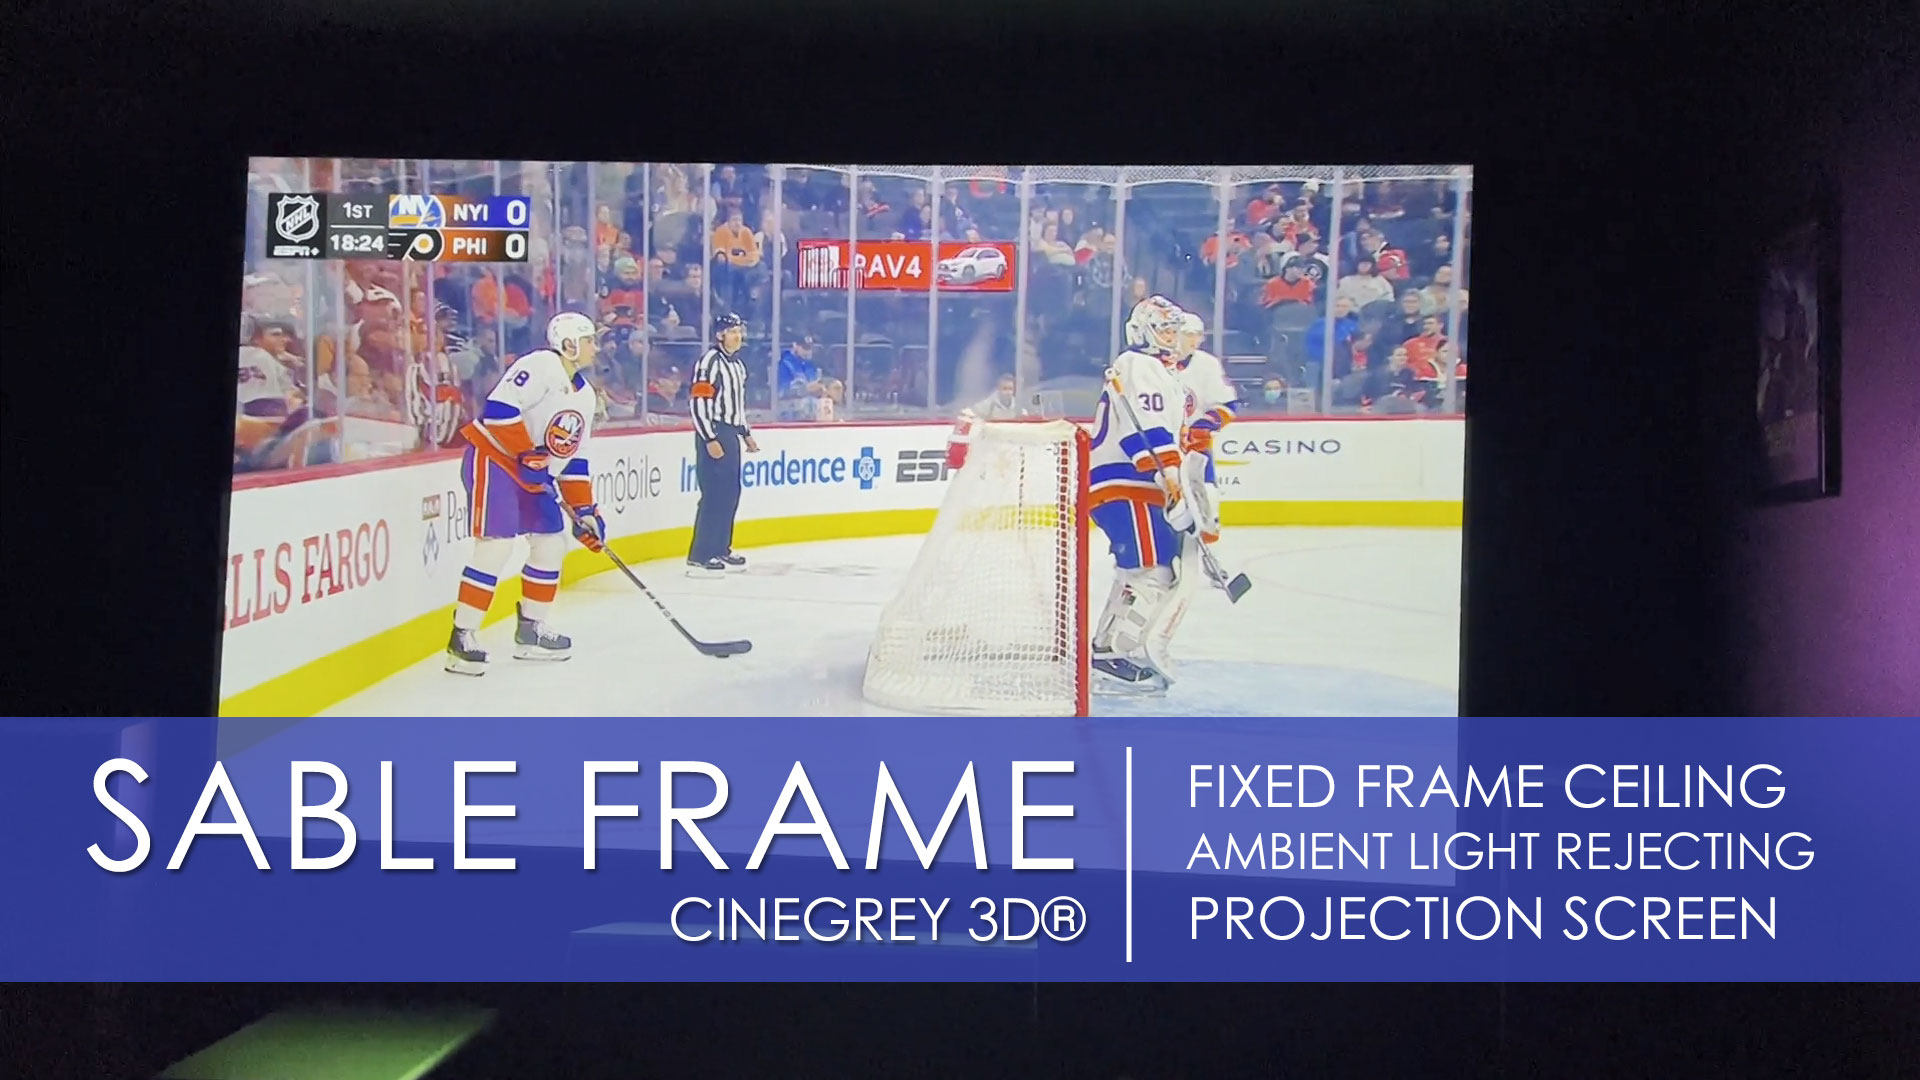 Sable Frame CineGrey 3D® Ceiling Ambient Light Rejecting Projector Screen